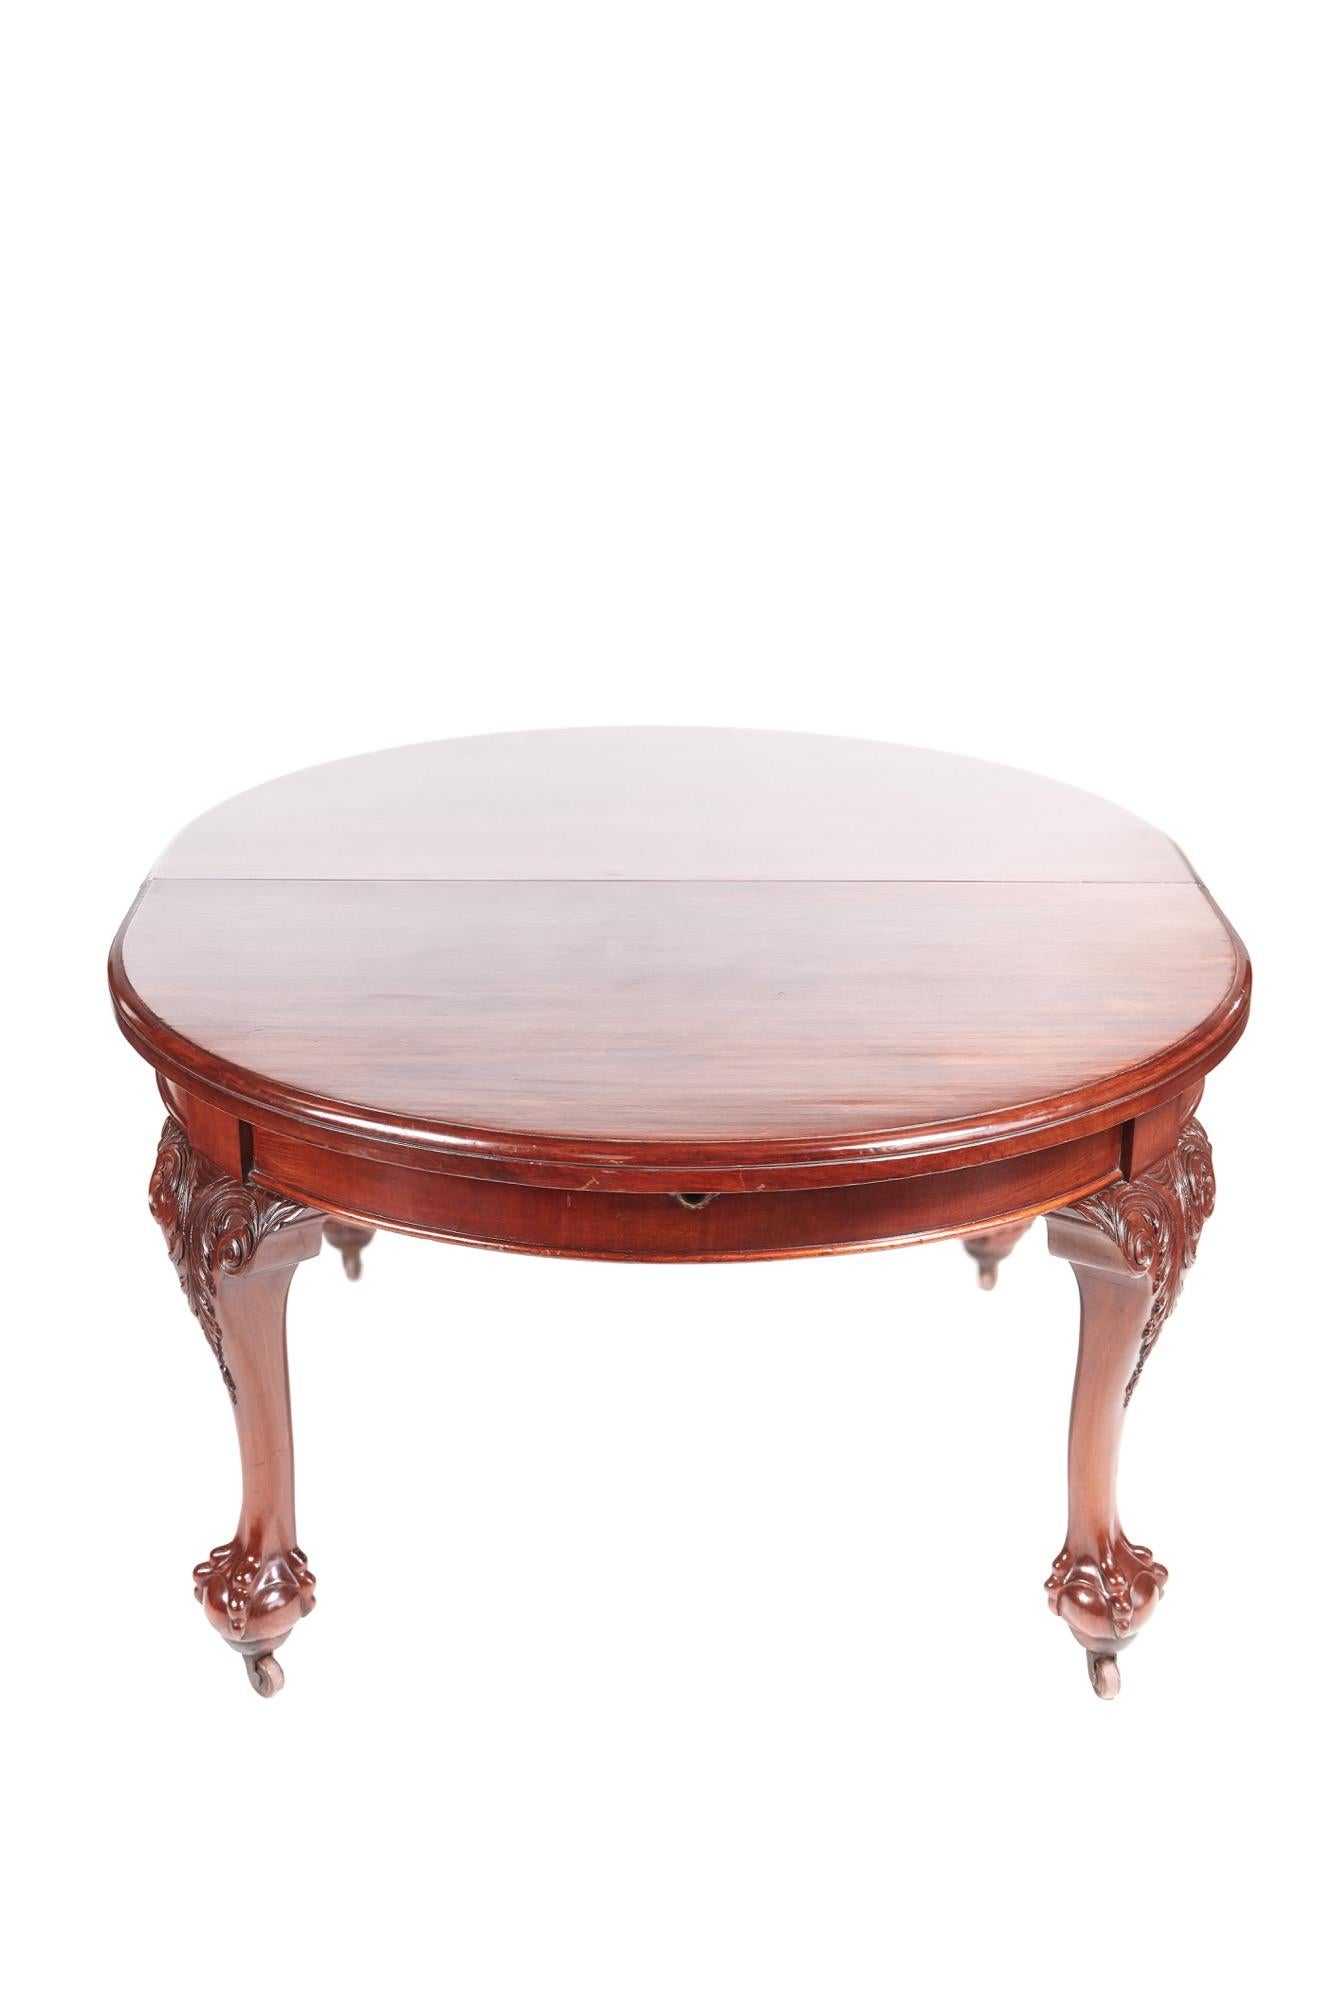 This is a quality Victorian antique mahogany extending dining table with a magnificent mahogany top having a moulded edge, two large extra leaves and features a winding mechanism with original handle. It stands on wonderful claw and ball legs with